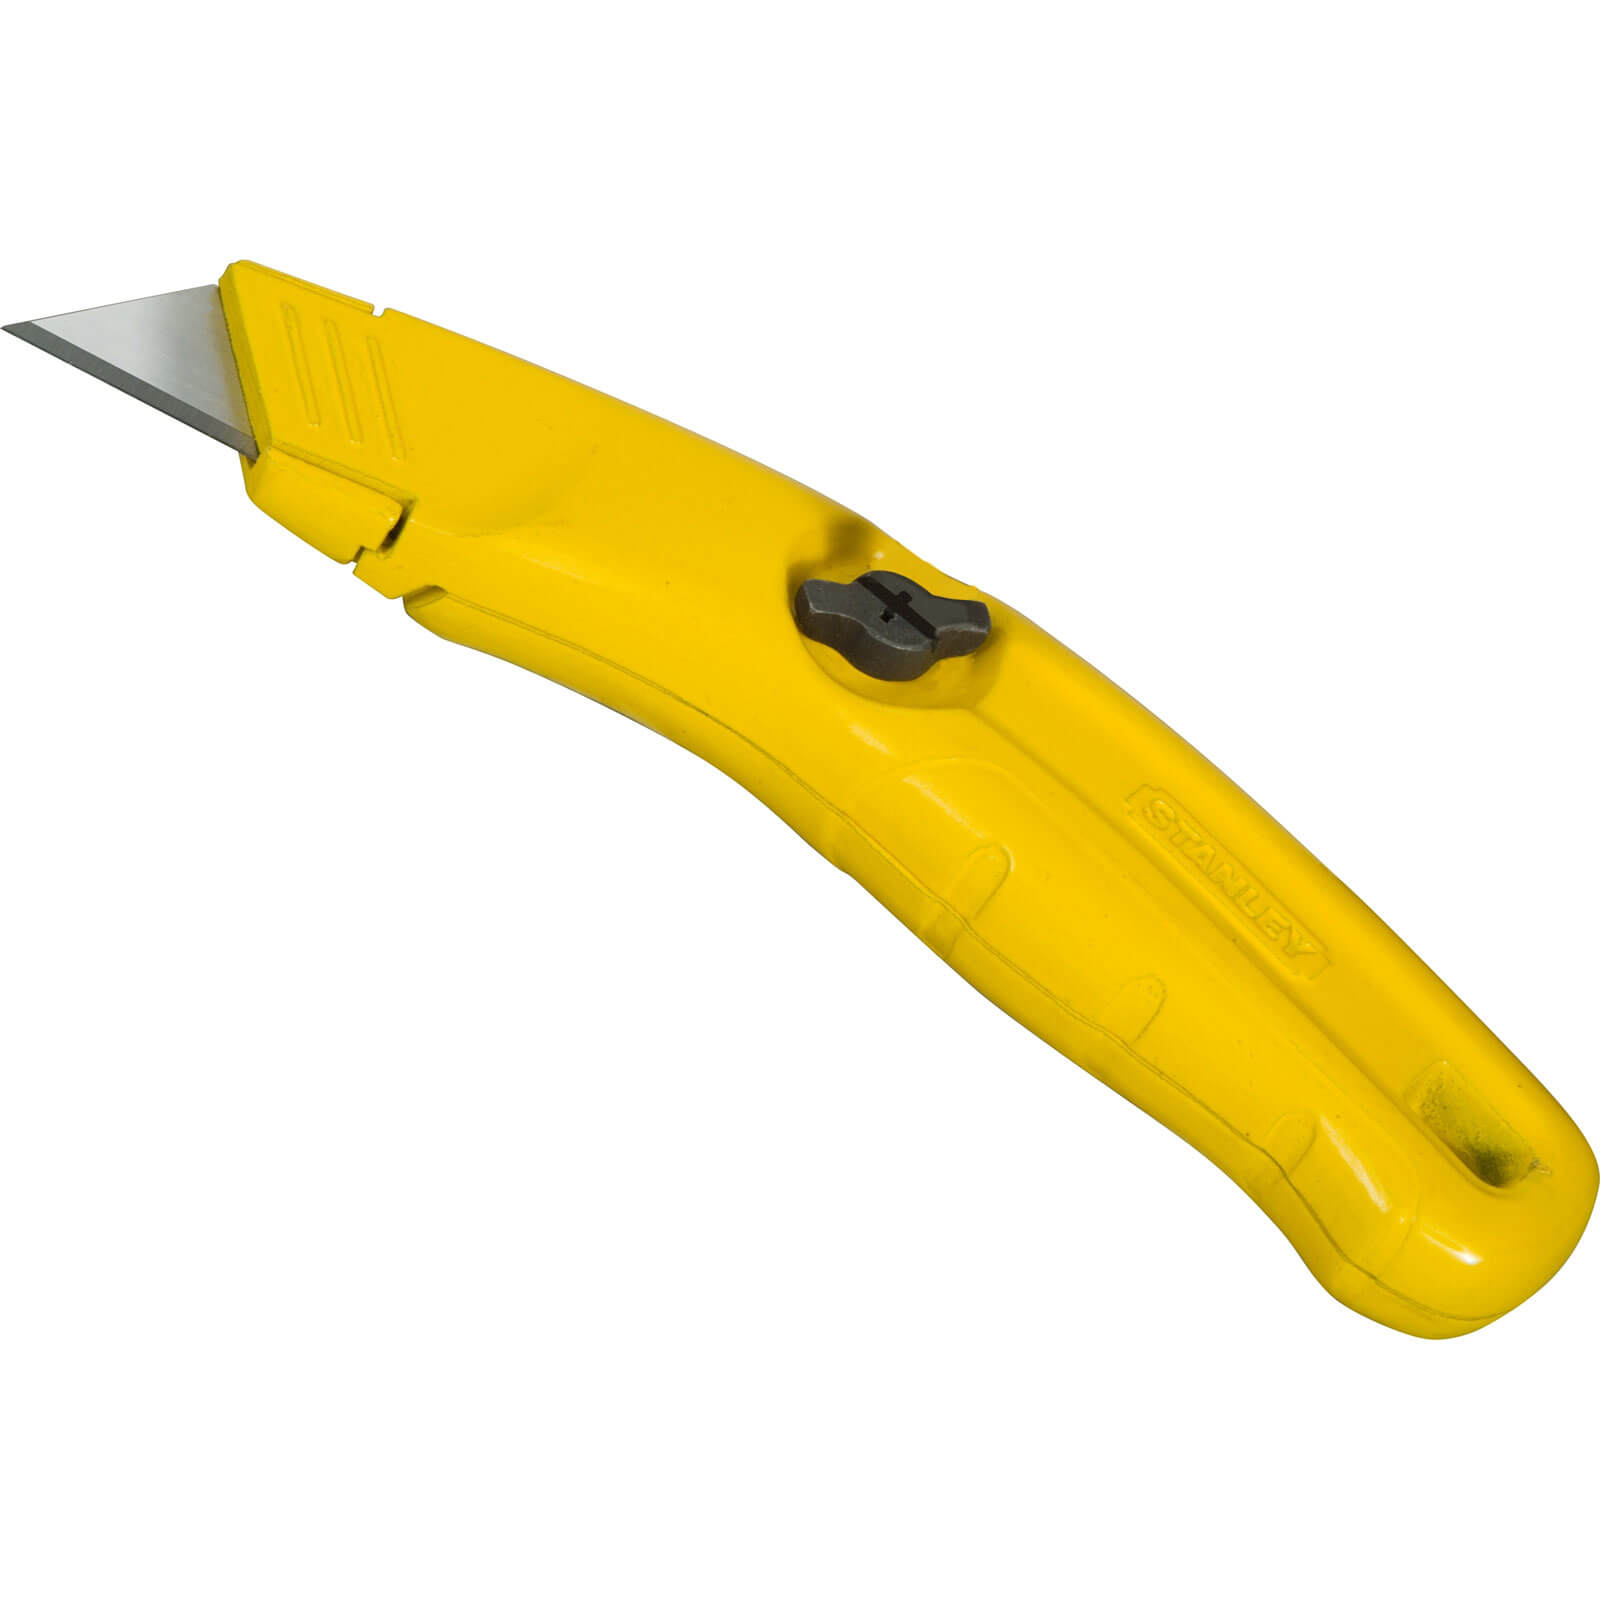 Stanley Narrow Nose Fixed Blade Utility Knife